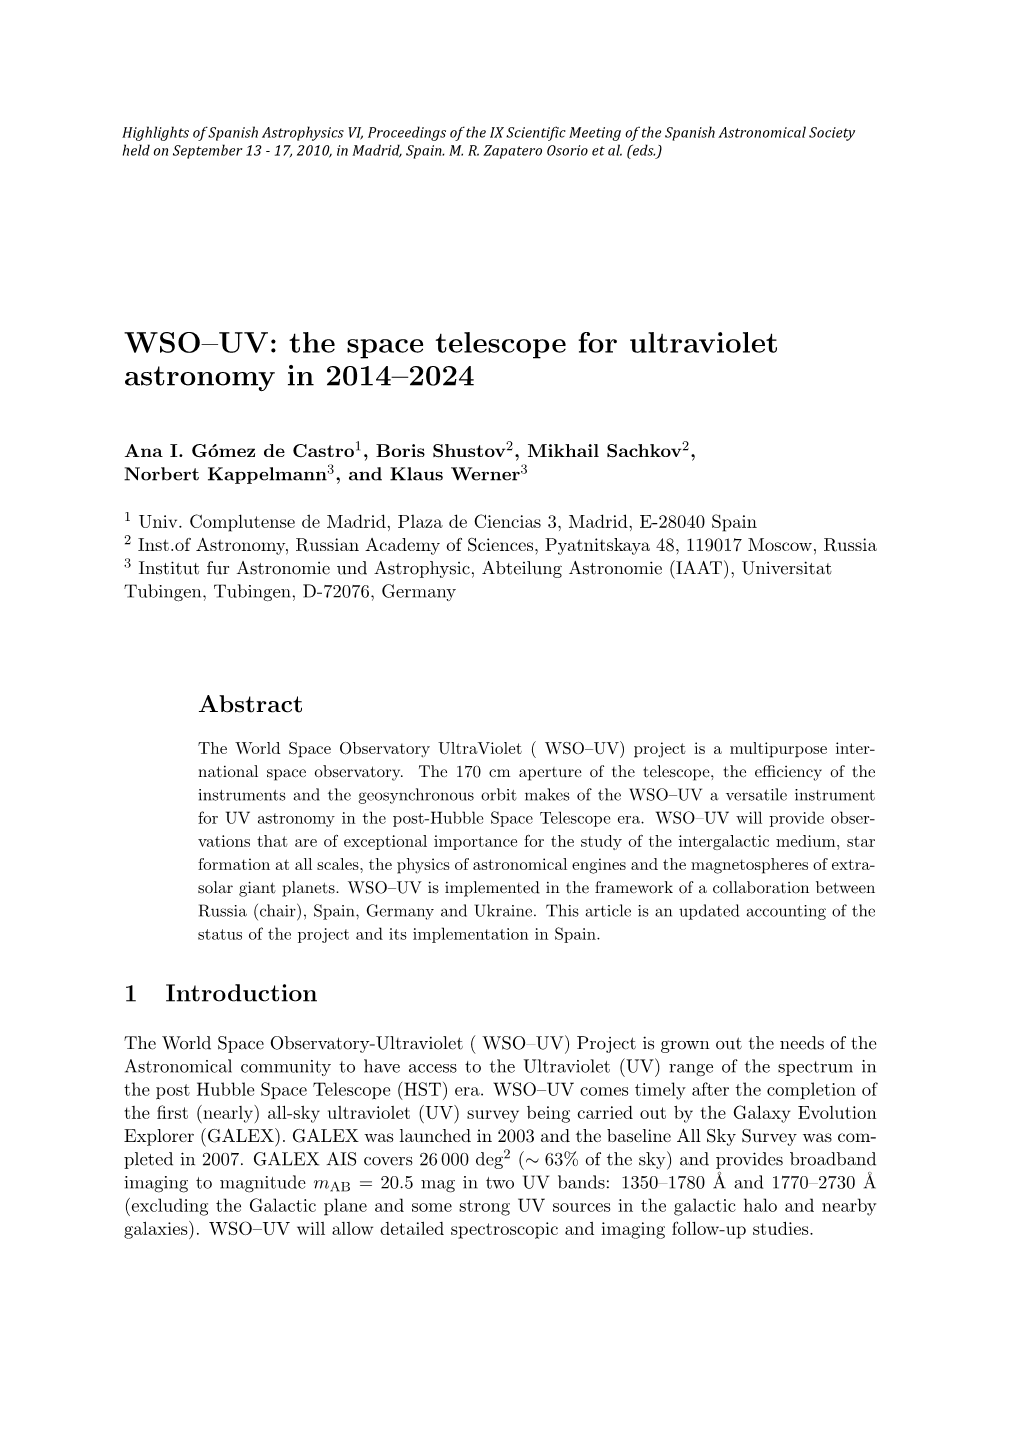 WSO–UV: the Space Telescope for Ultraviolet Astronomy in 2014–2024